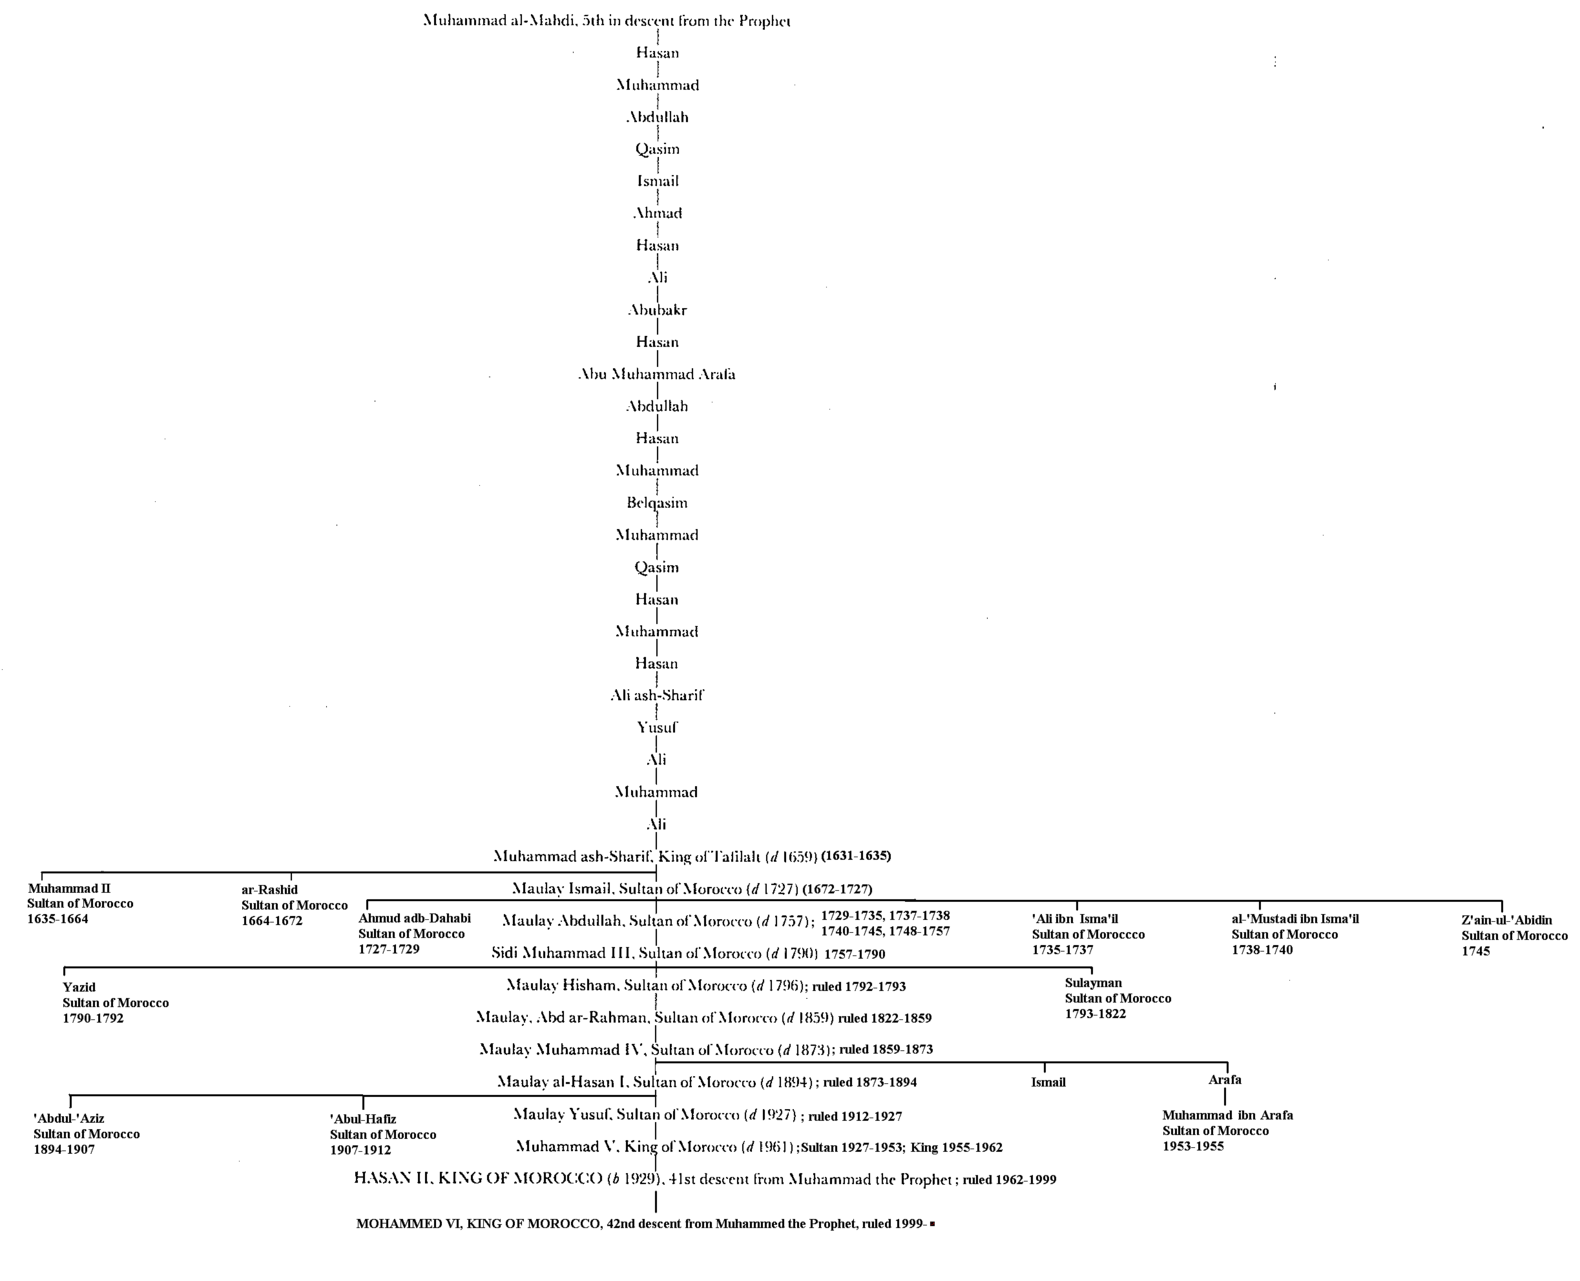 Genealogical tree of the Alouite family showing their descent from Muhammad.[17][18]